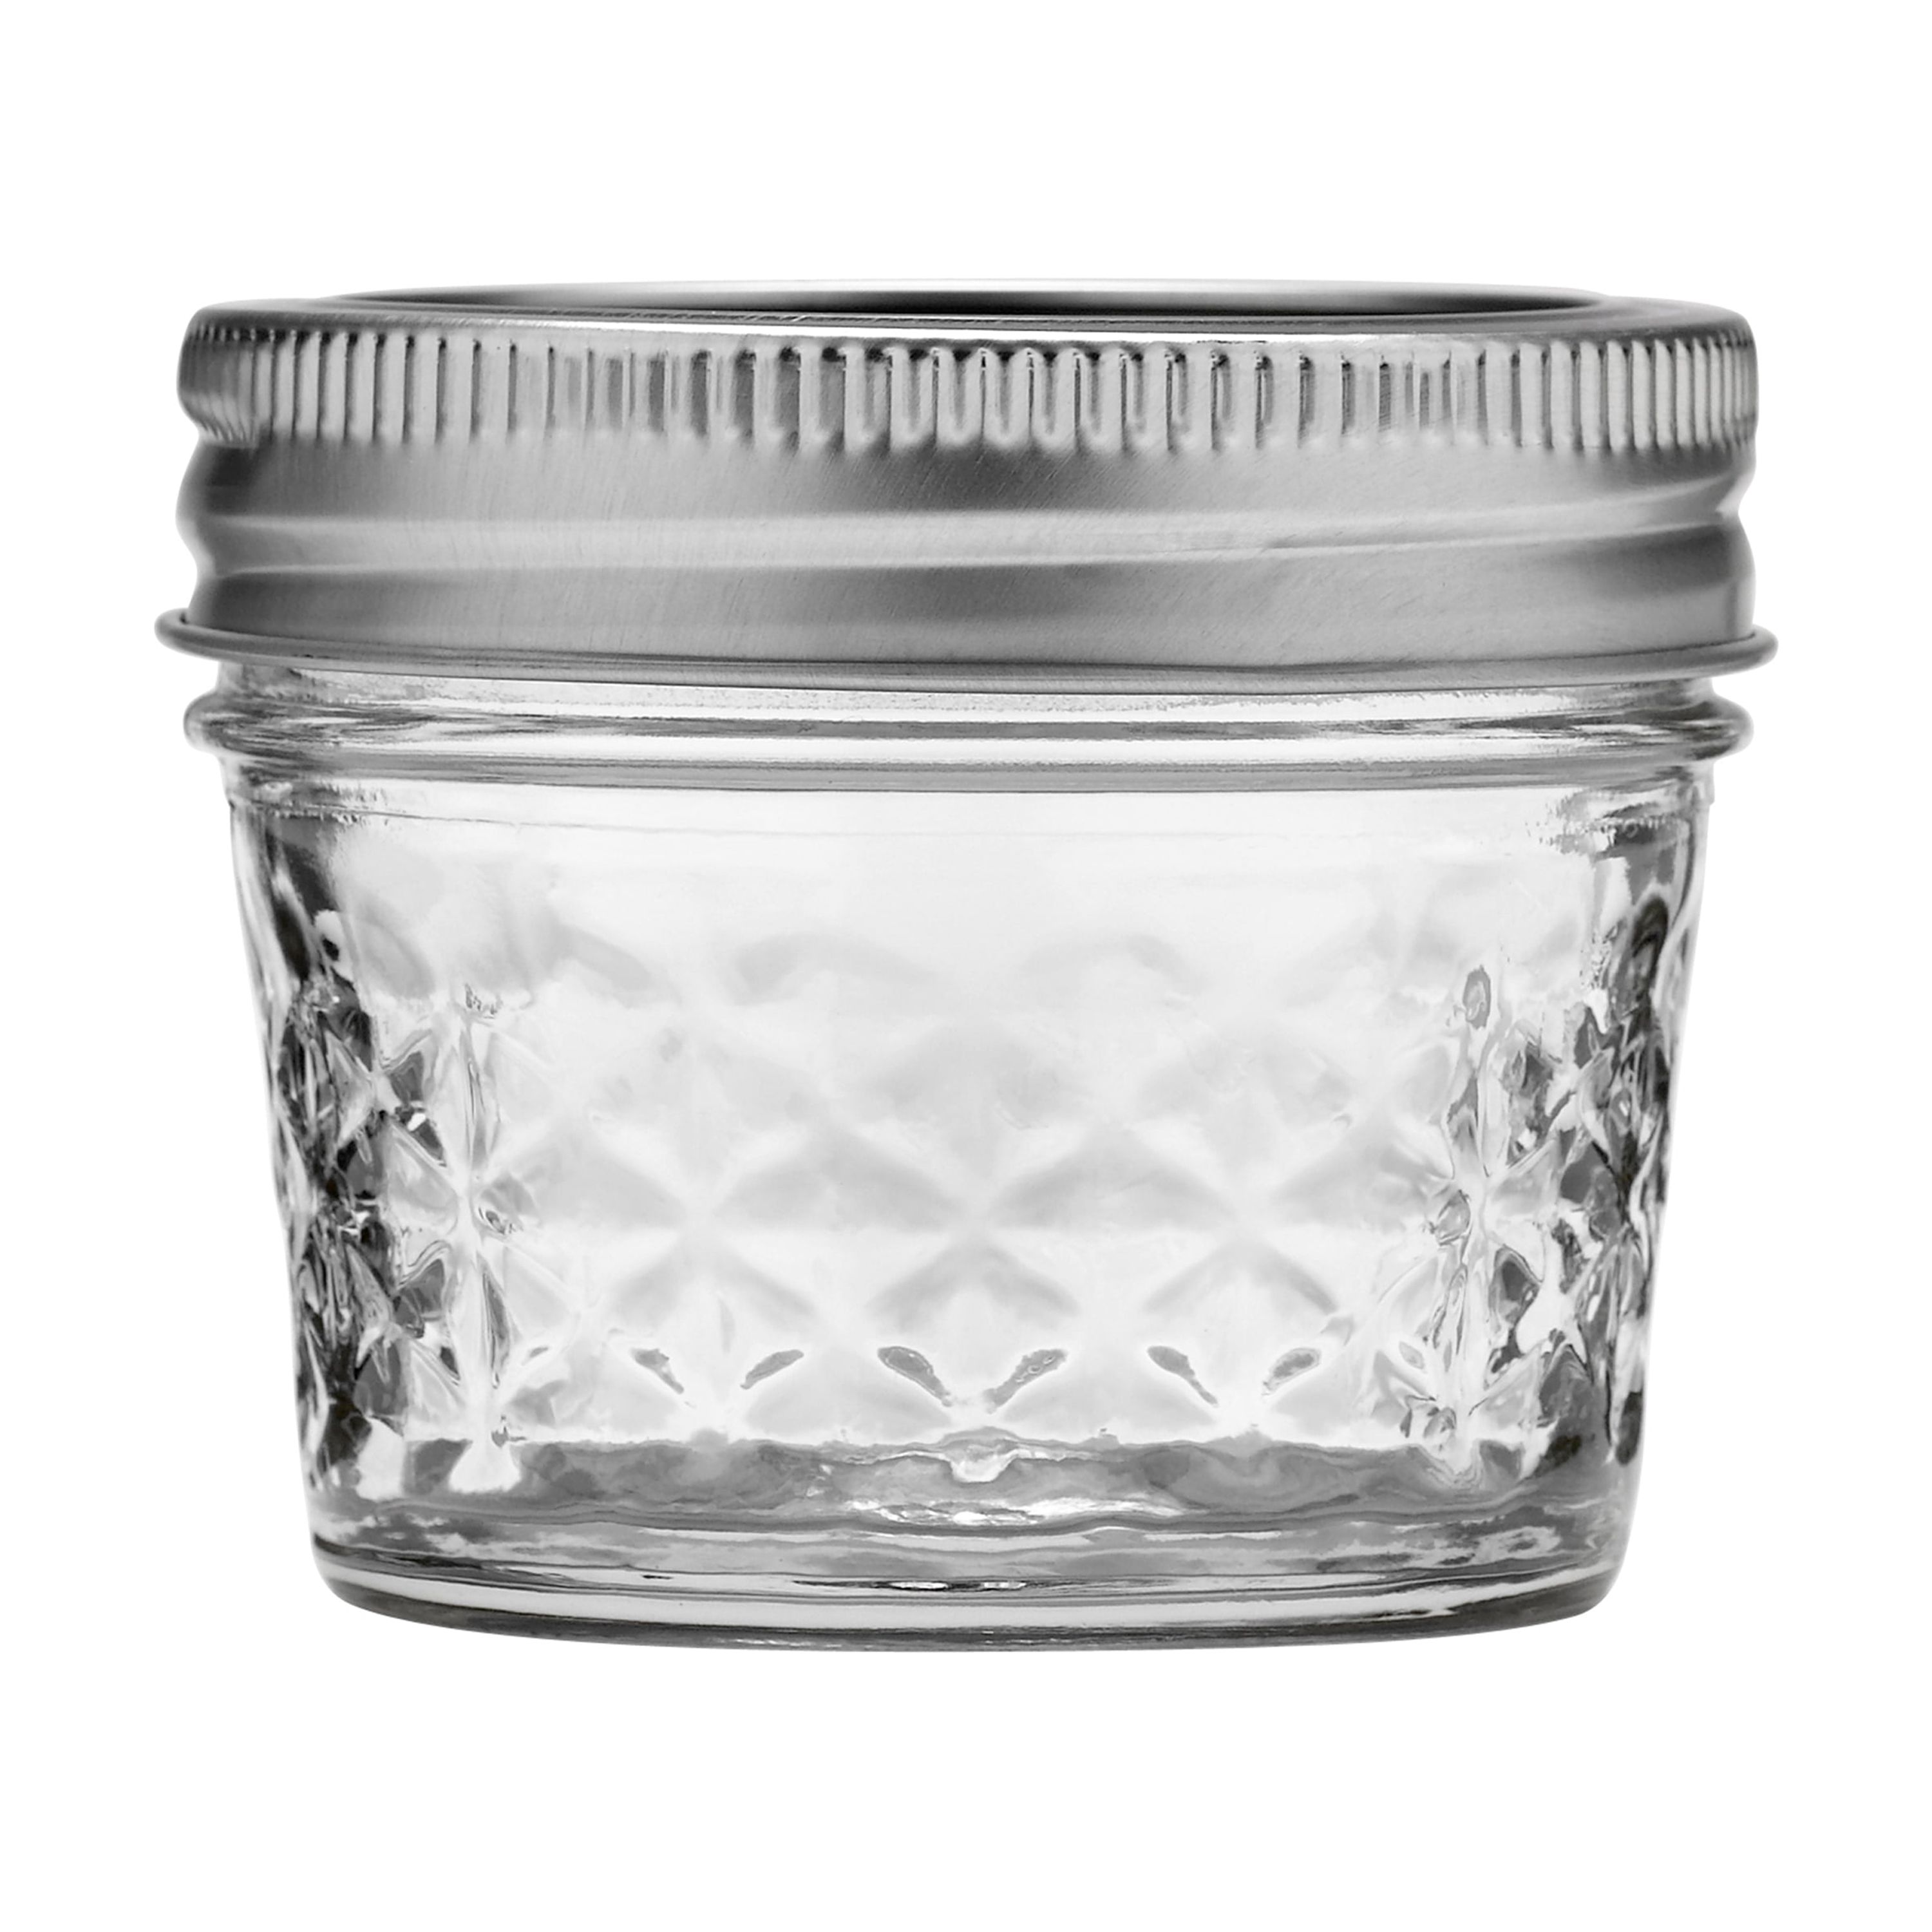 Ball Regular Mouth 4oz Quilted Pint Mason Jars, 12 Count - image 1 of 11